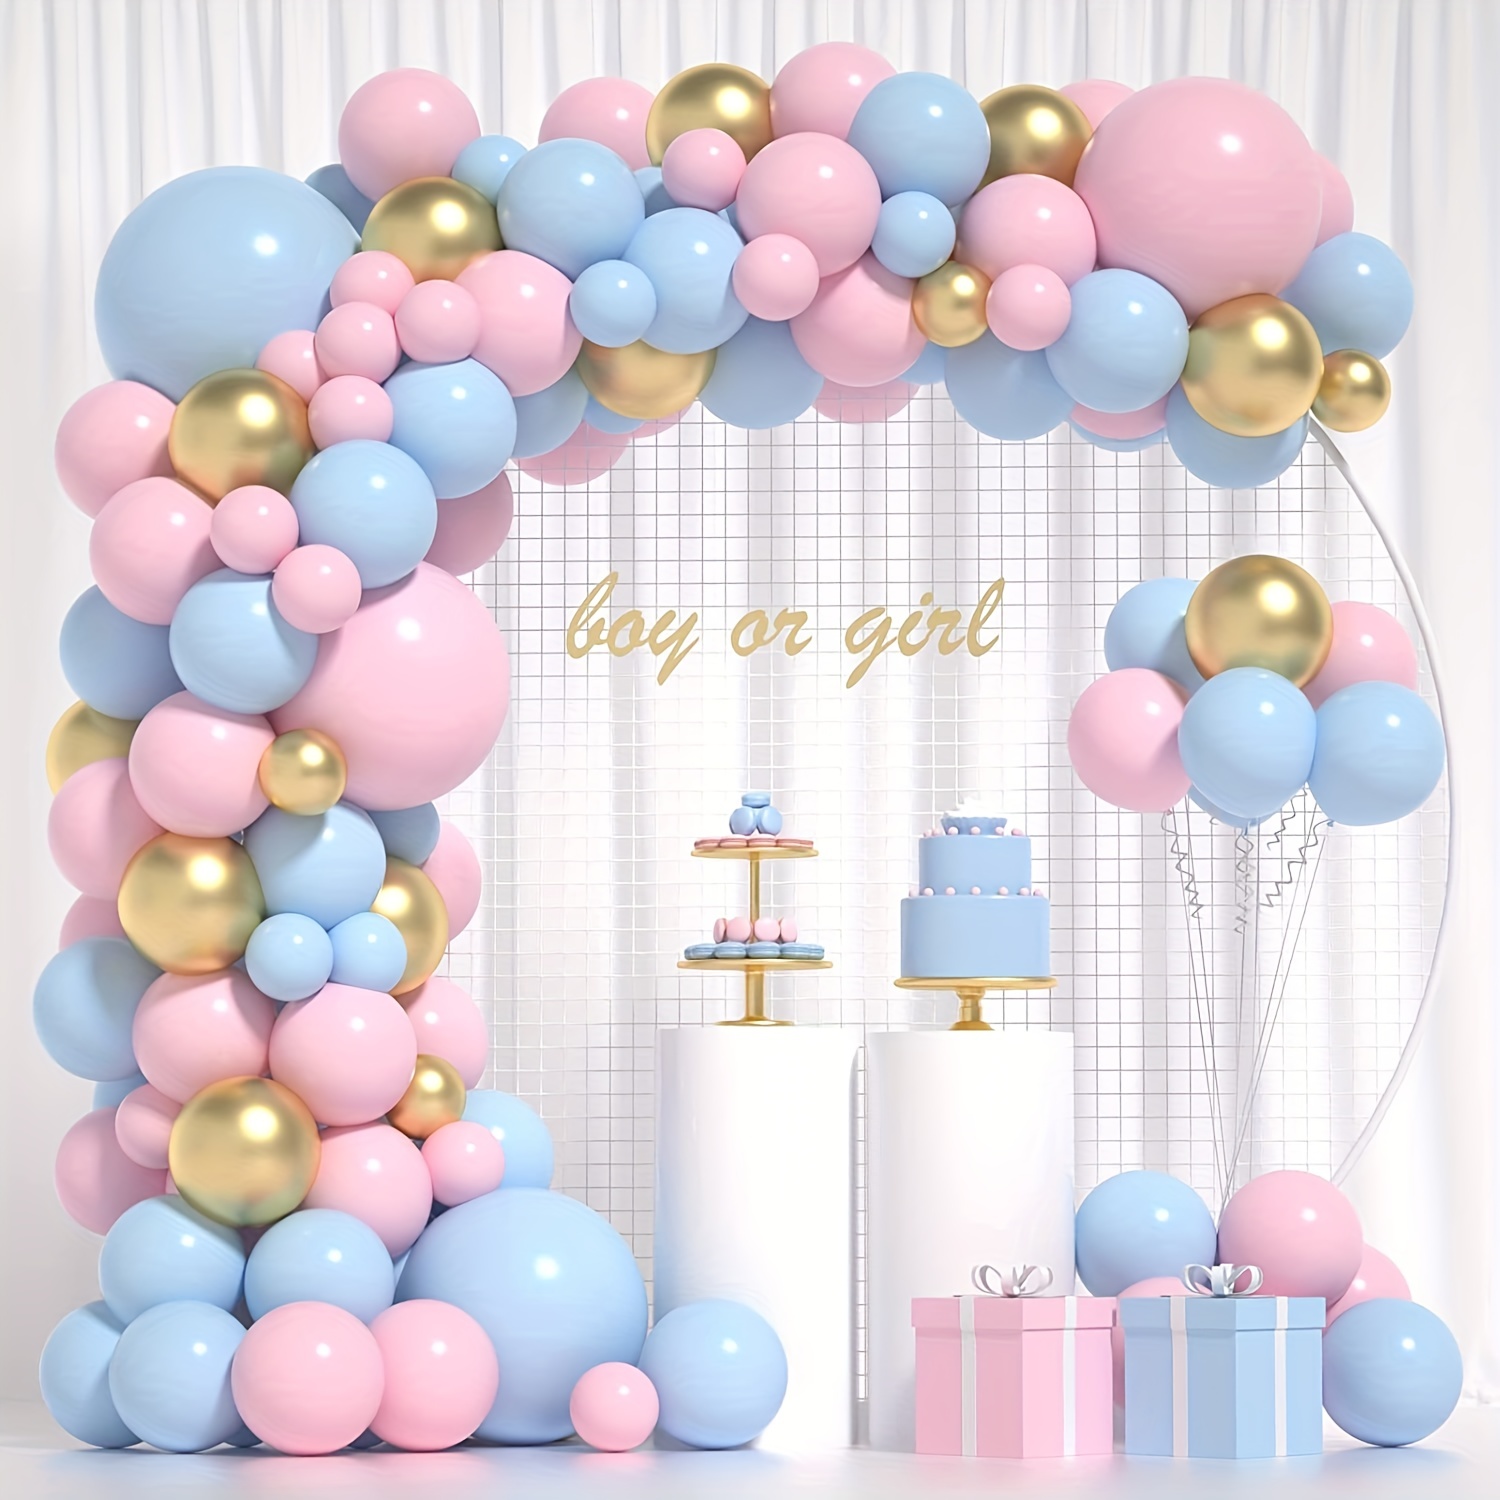 109pcs Gender Reveal Party Black Hot Pink Balloon Garland Kit With Bobo  Balloons For Girl Princess Birthday Party